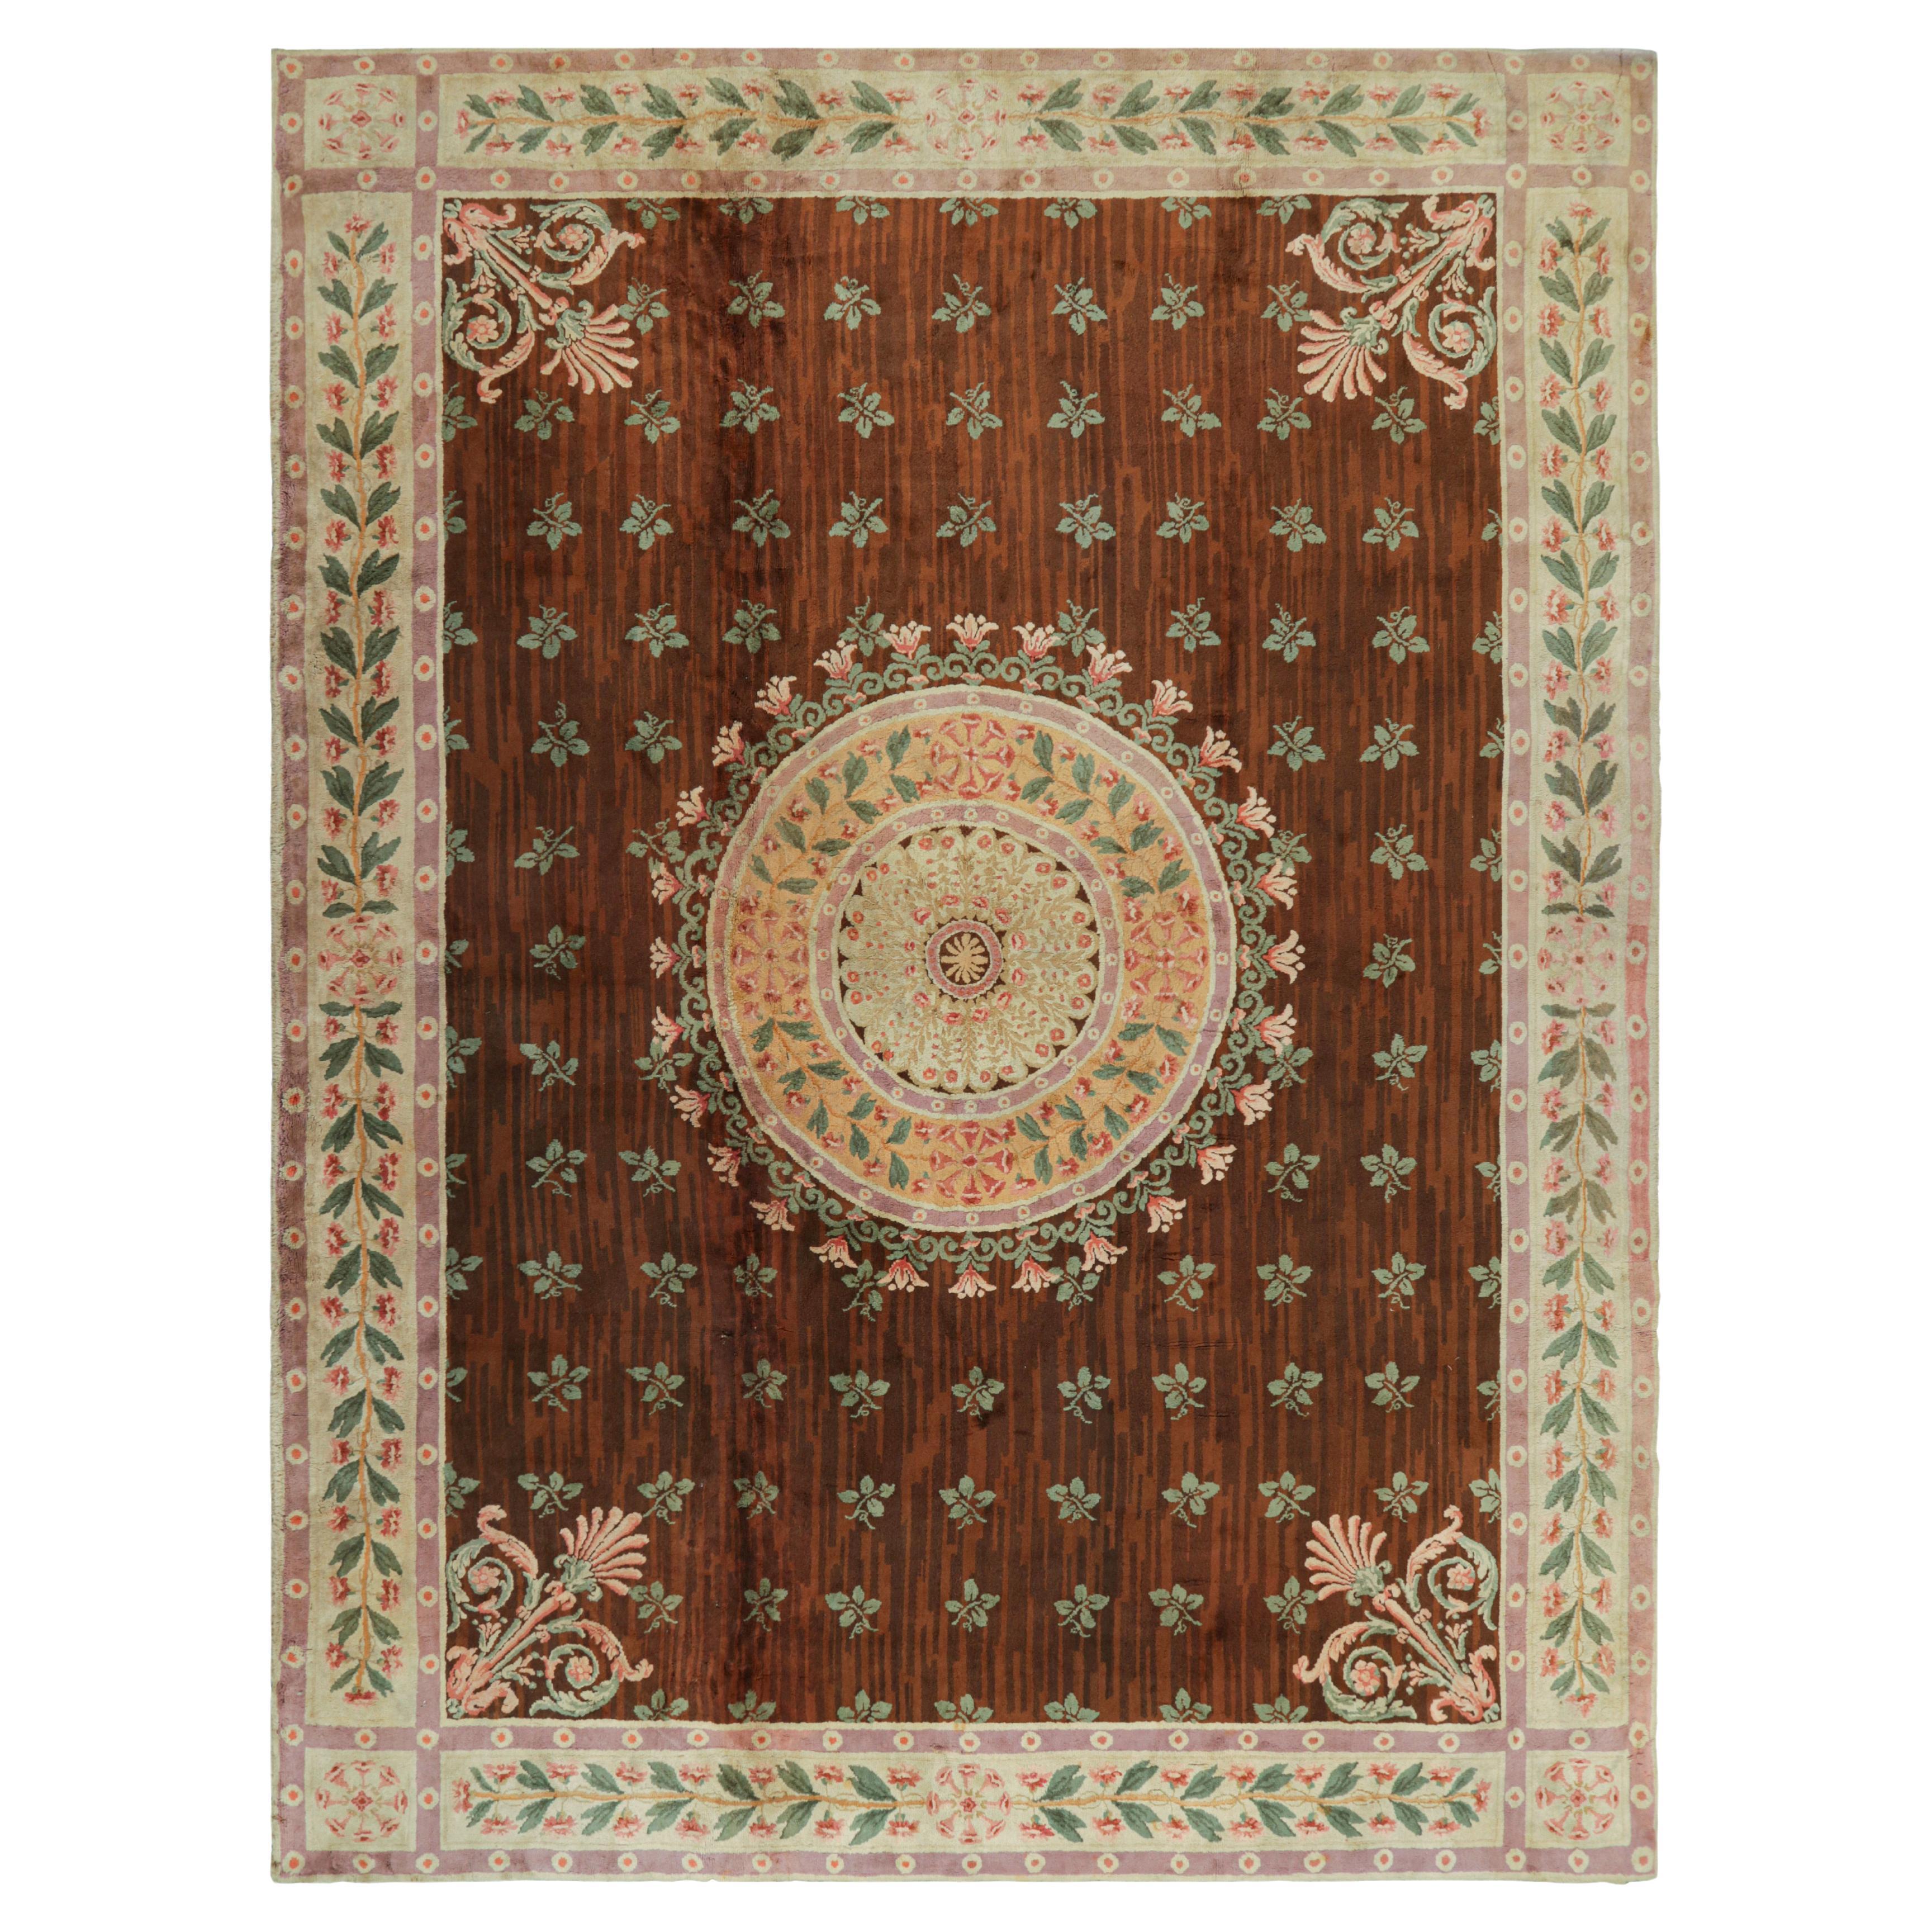 Oversized Antique French Savonnerie Rug with Floral Medallion